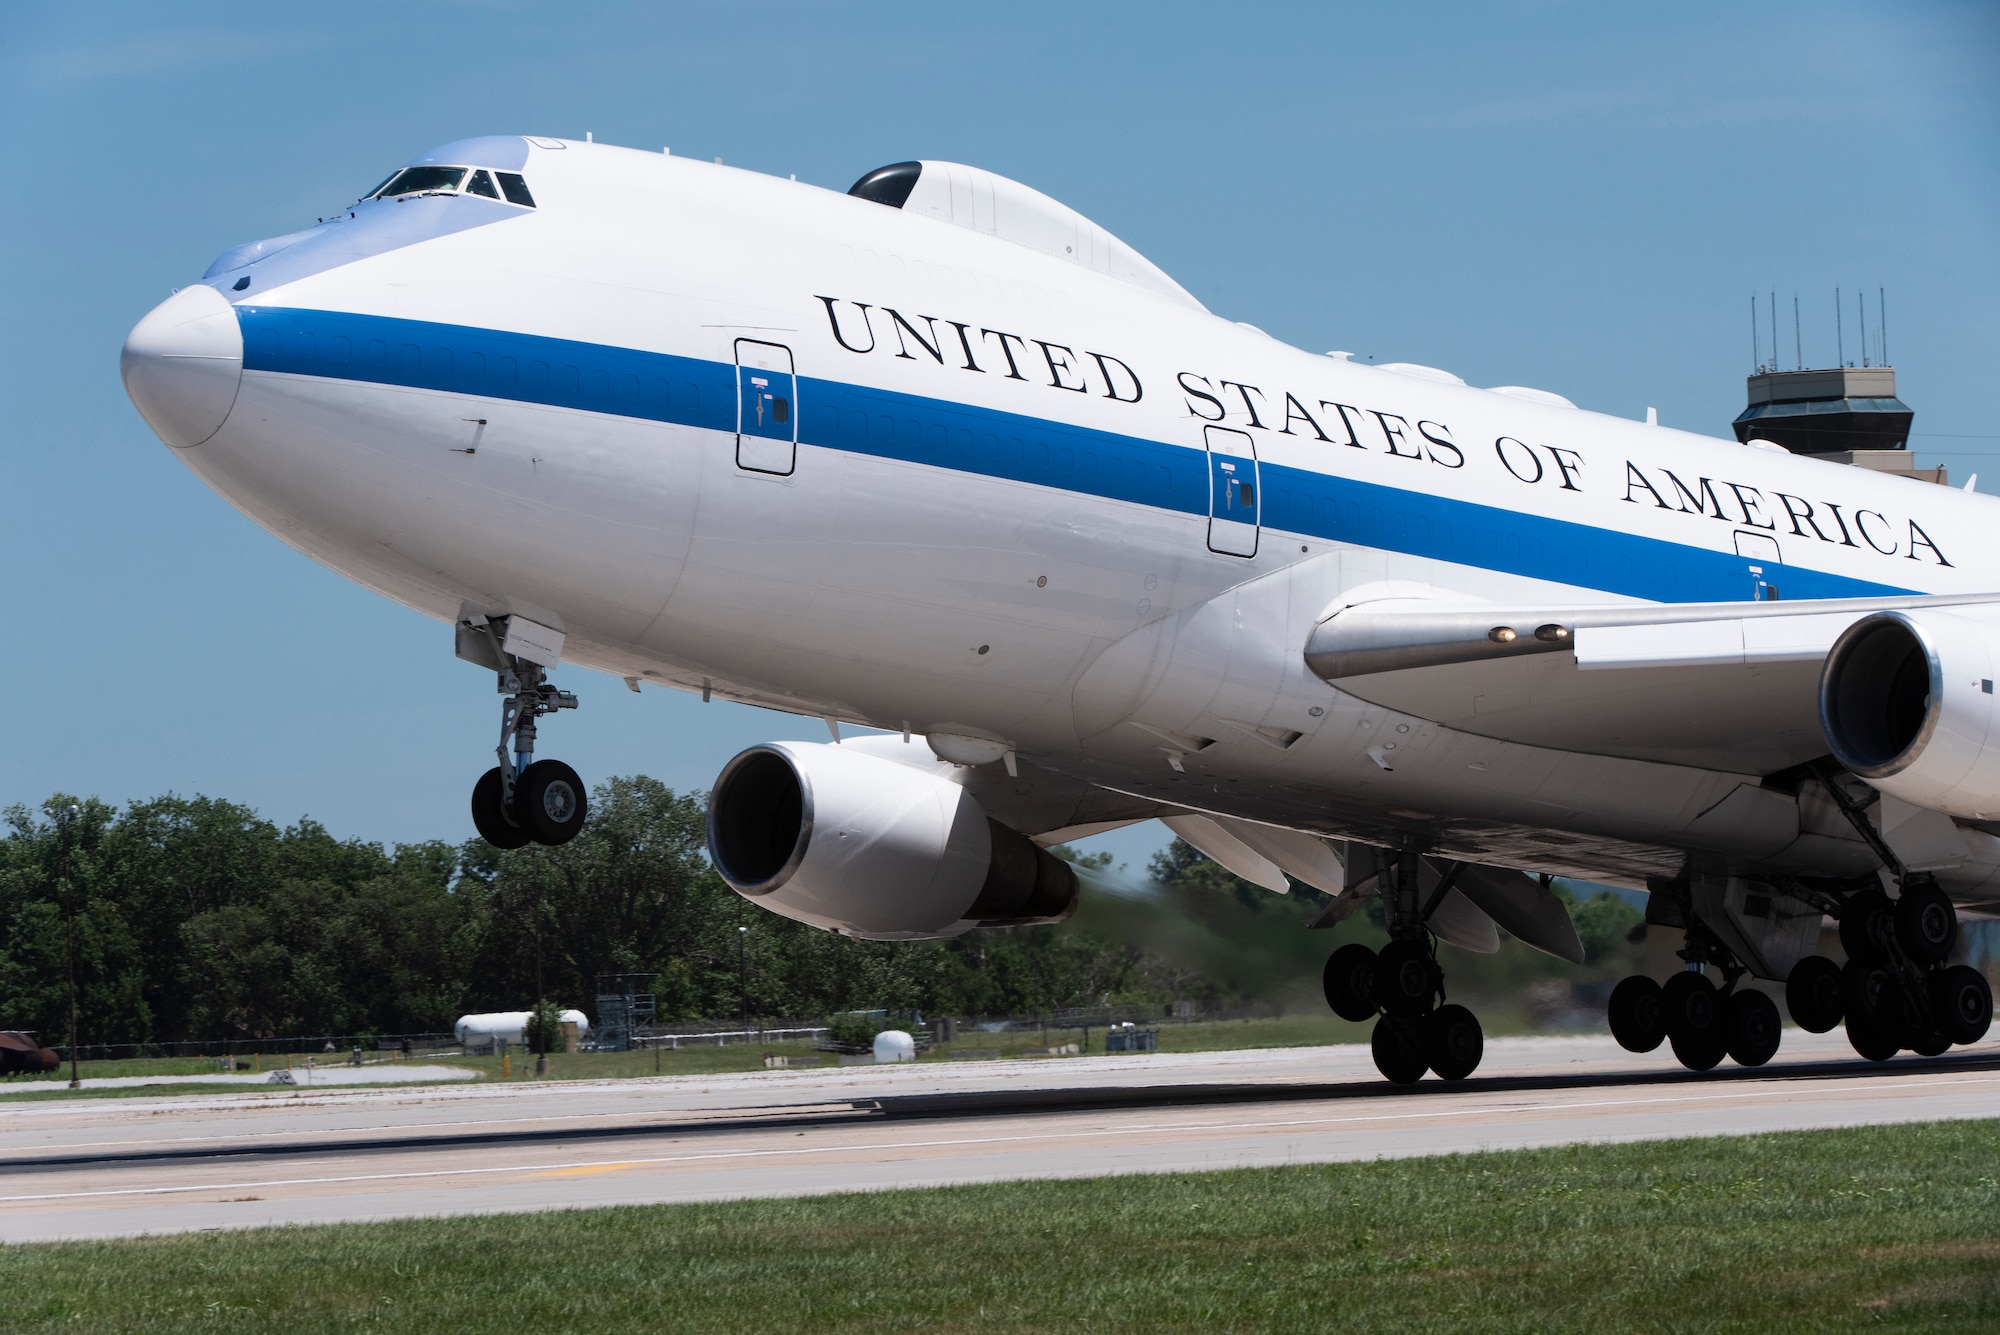 A U.S. Air Force E-4B National Airborne Operations Center aircraft takes off from Offutt Air Force Base, Nebraska, July 10, 2019. The E-4B provides travel support for the Secretary of Defense and their staff to ensure command and control connectivity outside of the continental United States. (U.S. Air Force photo by Staff Sgt. Jacob Skovo)